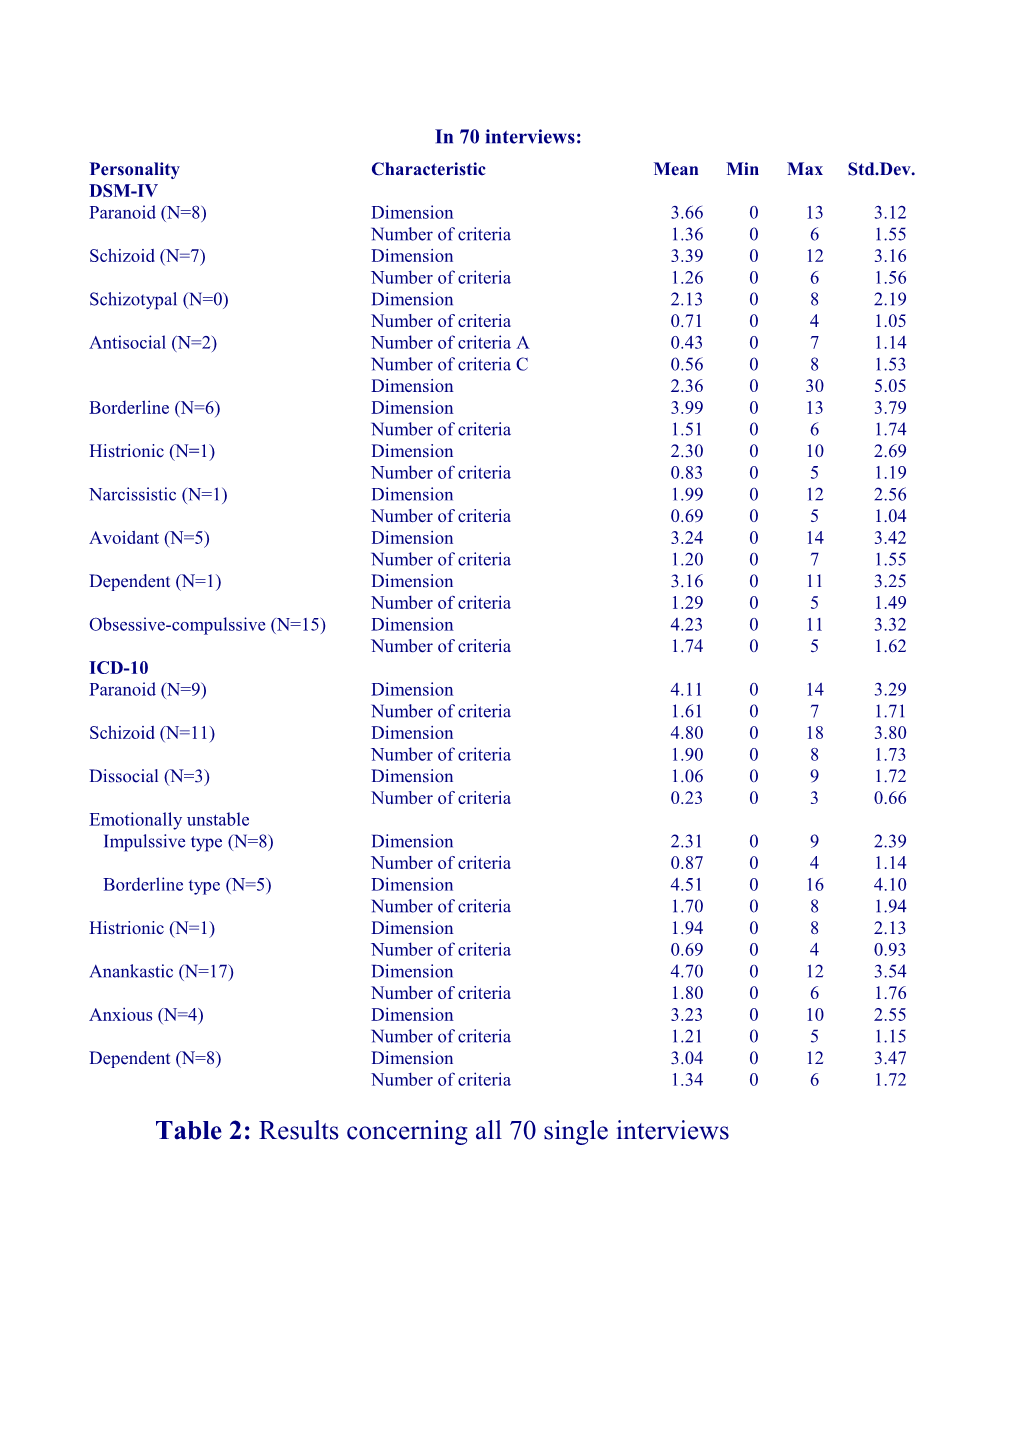 Table 2: Results Concerning All 70 Single Interviews